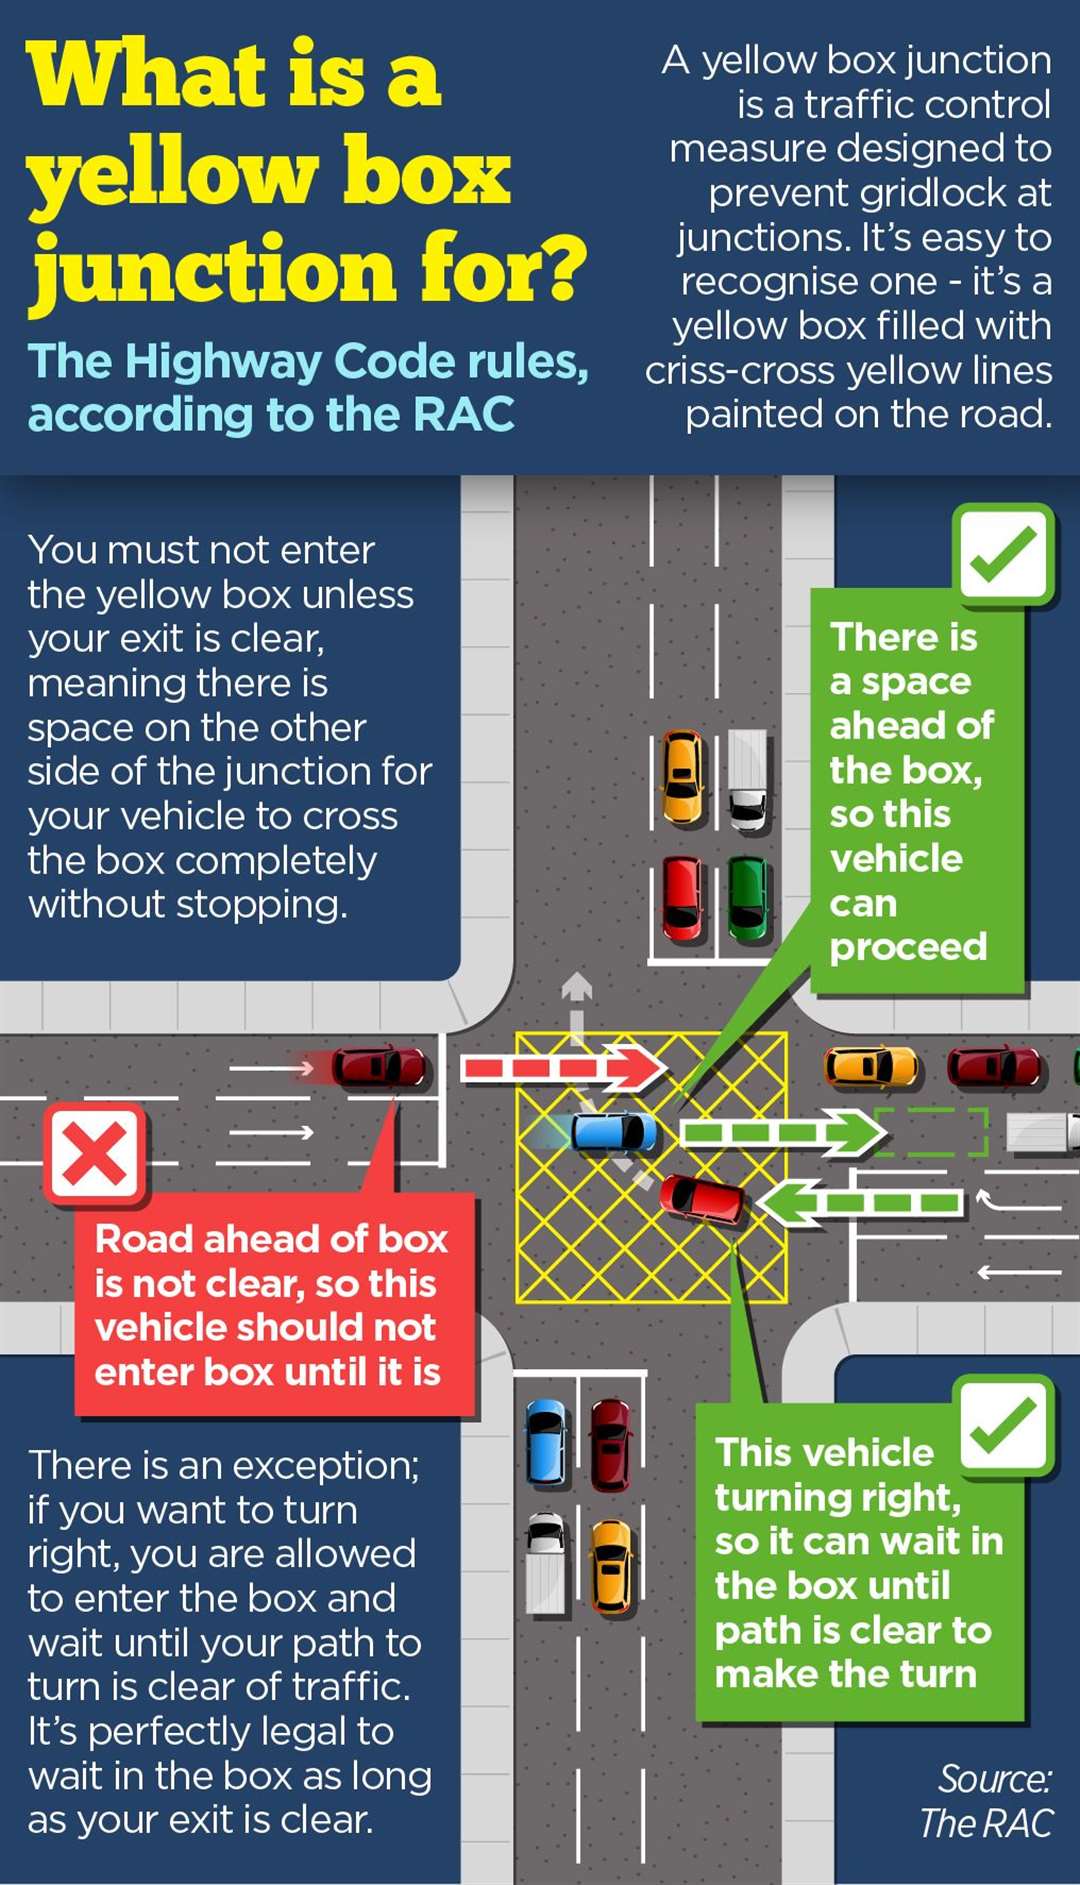 The RAC says sometimes drivers get stuck in yellow boxes through no fault of their own